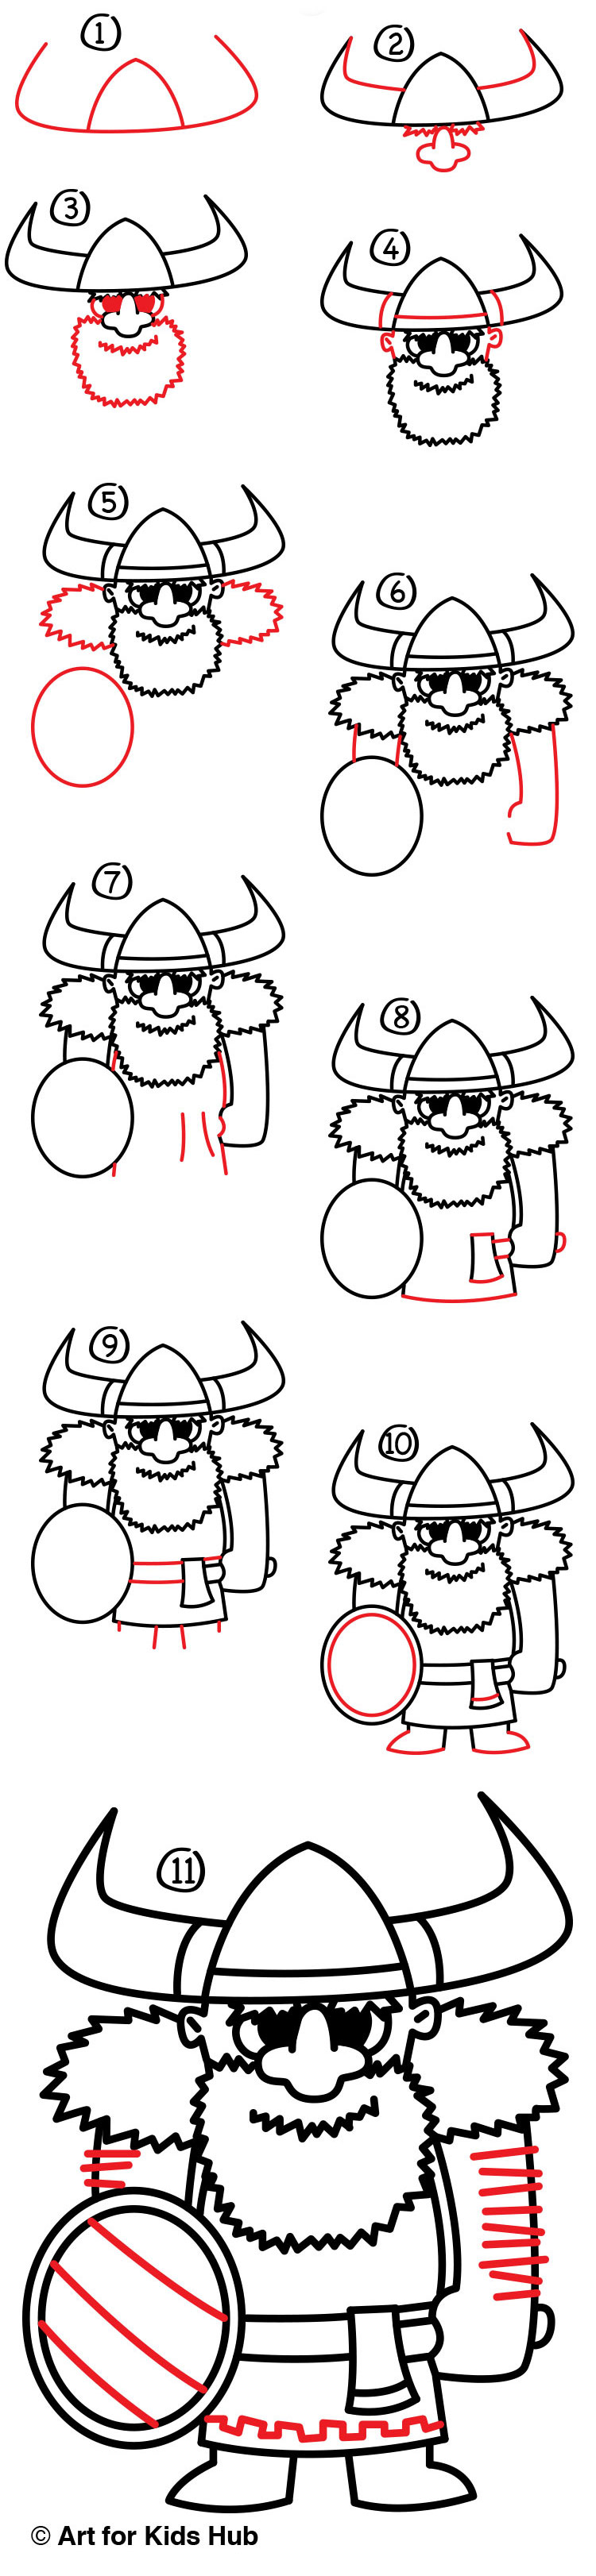 How To Draw A Viking - Art For Kids Hub